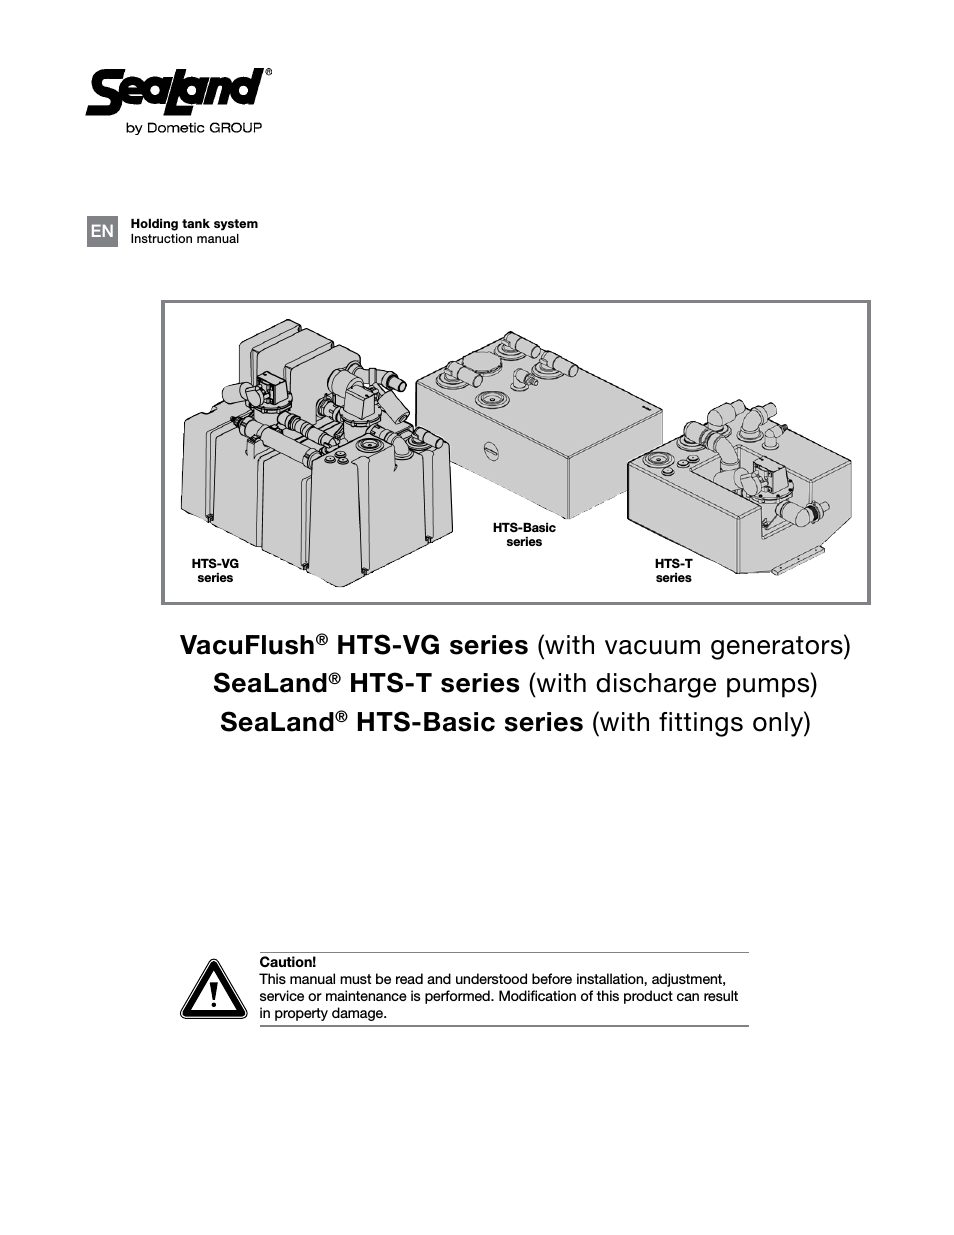 HTS-Basic series (with fittings only)